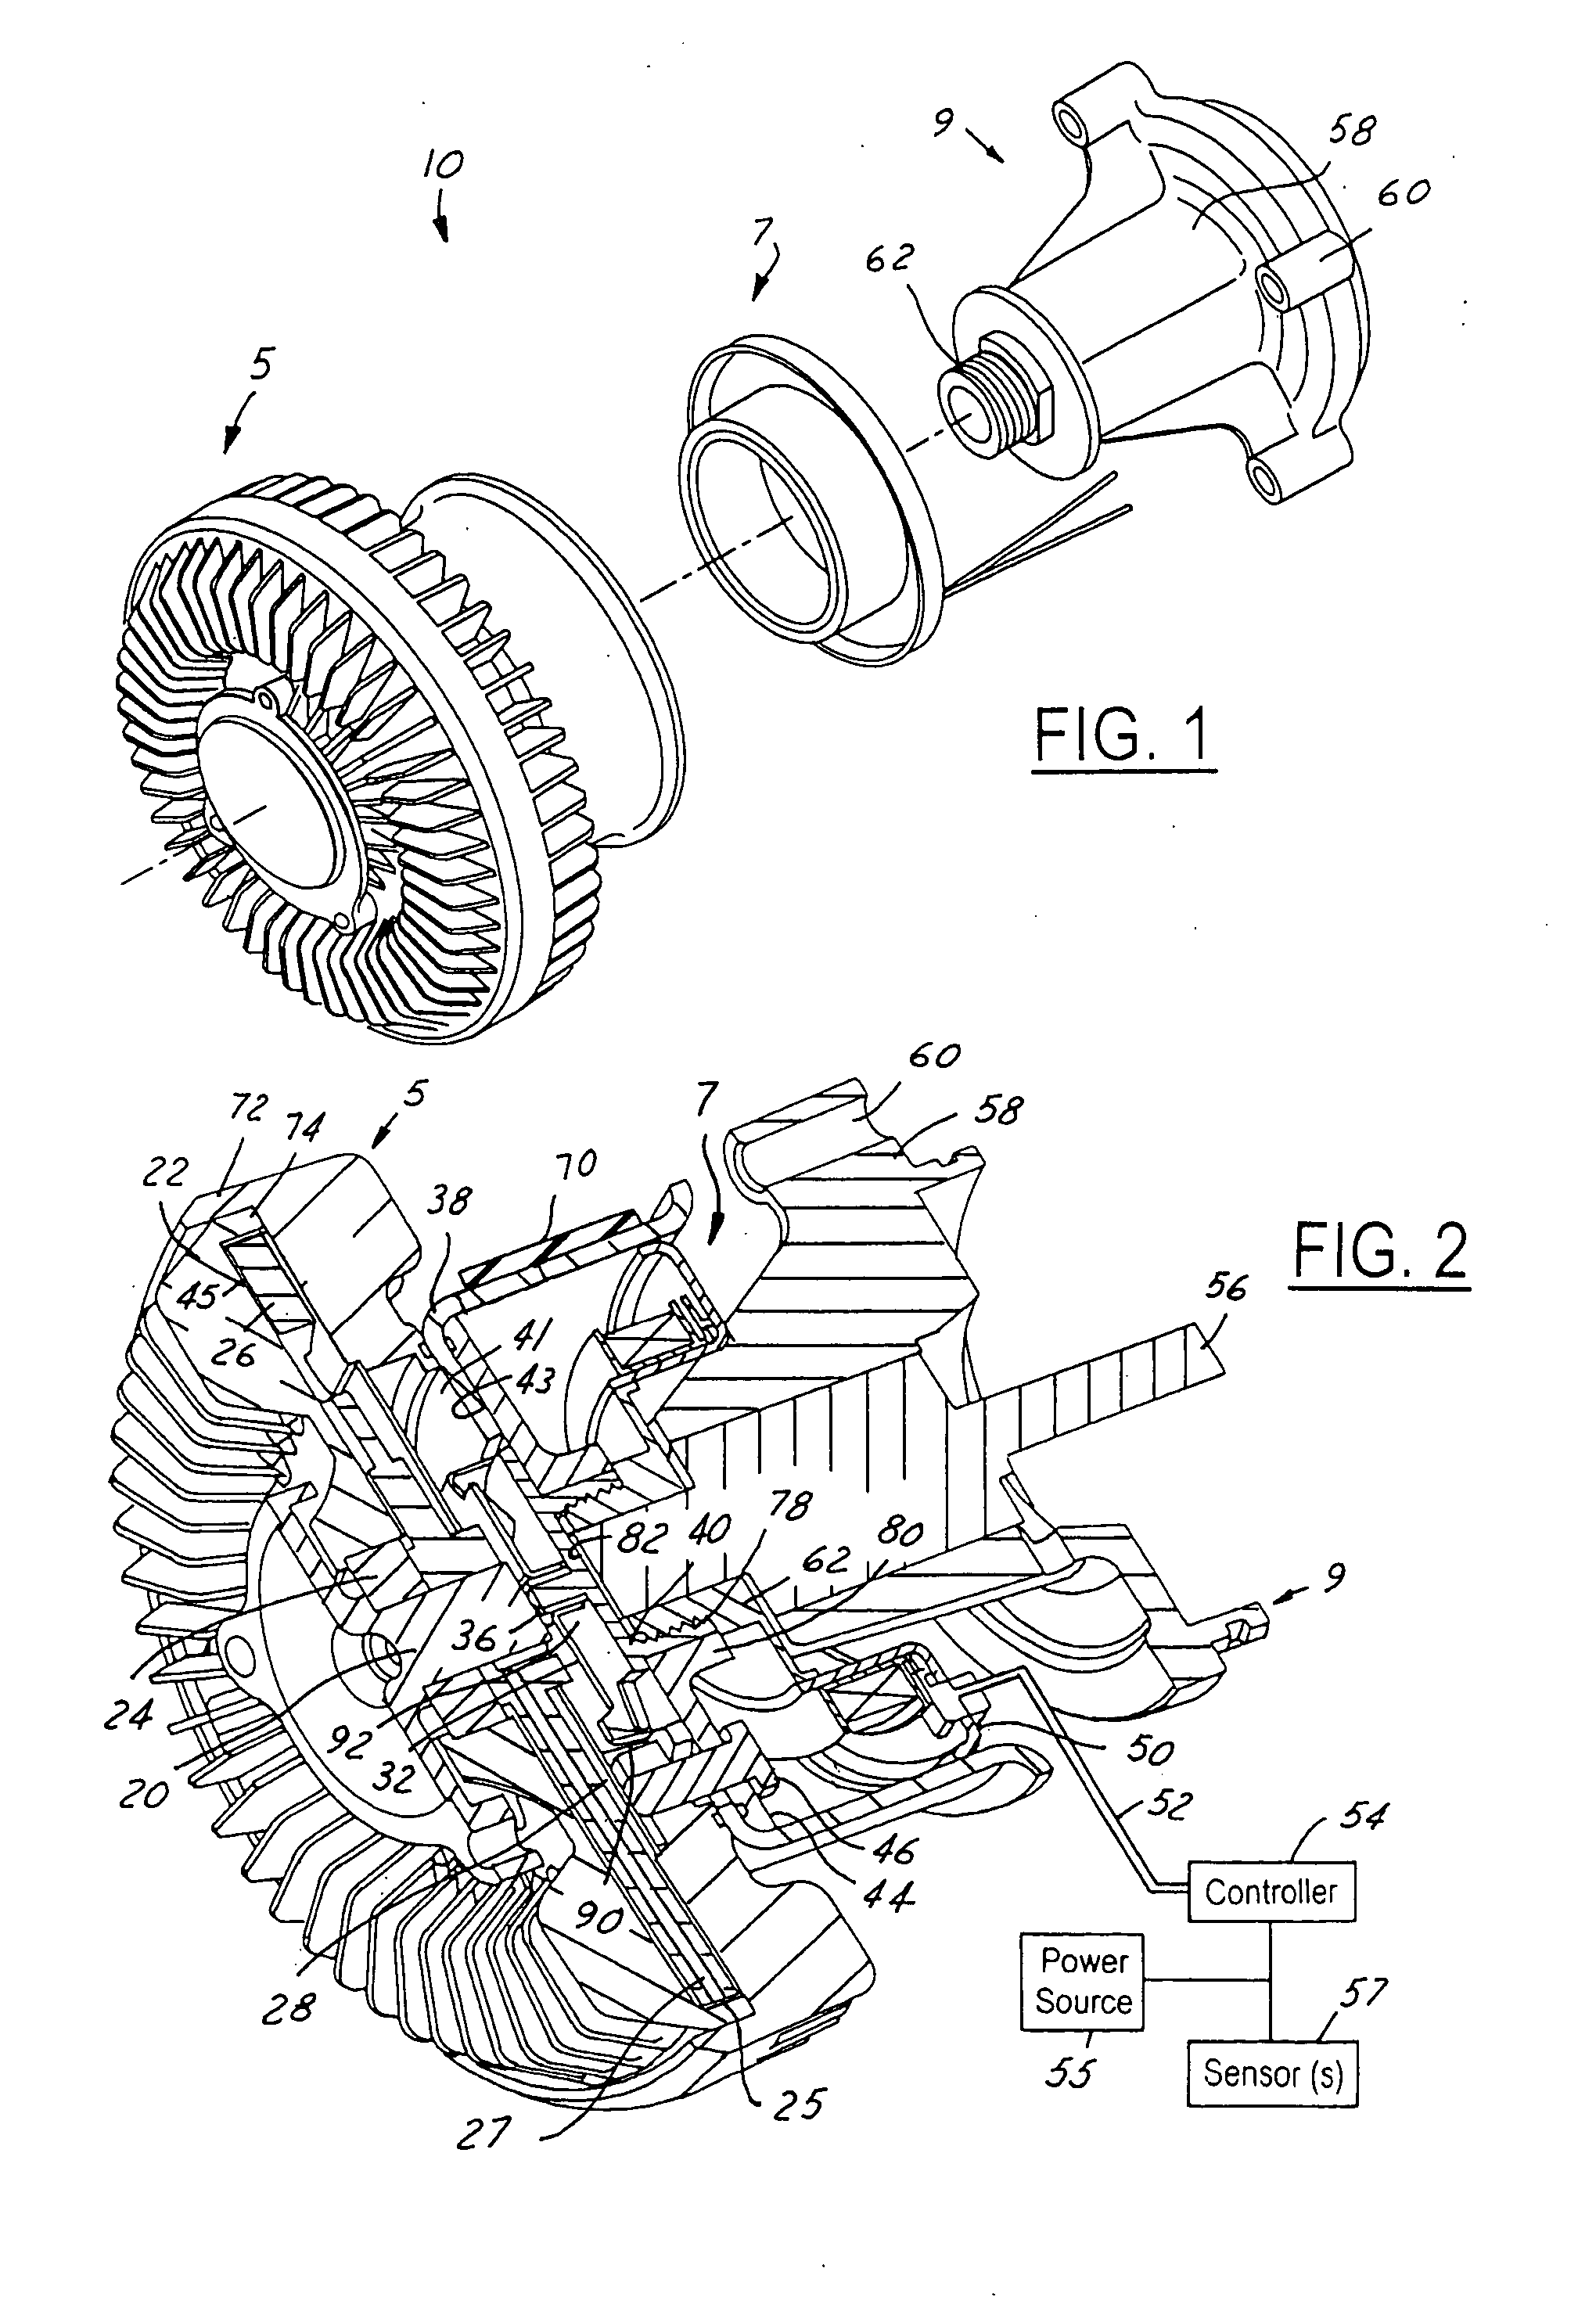 Electronically controlled fluid coupling device